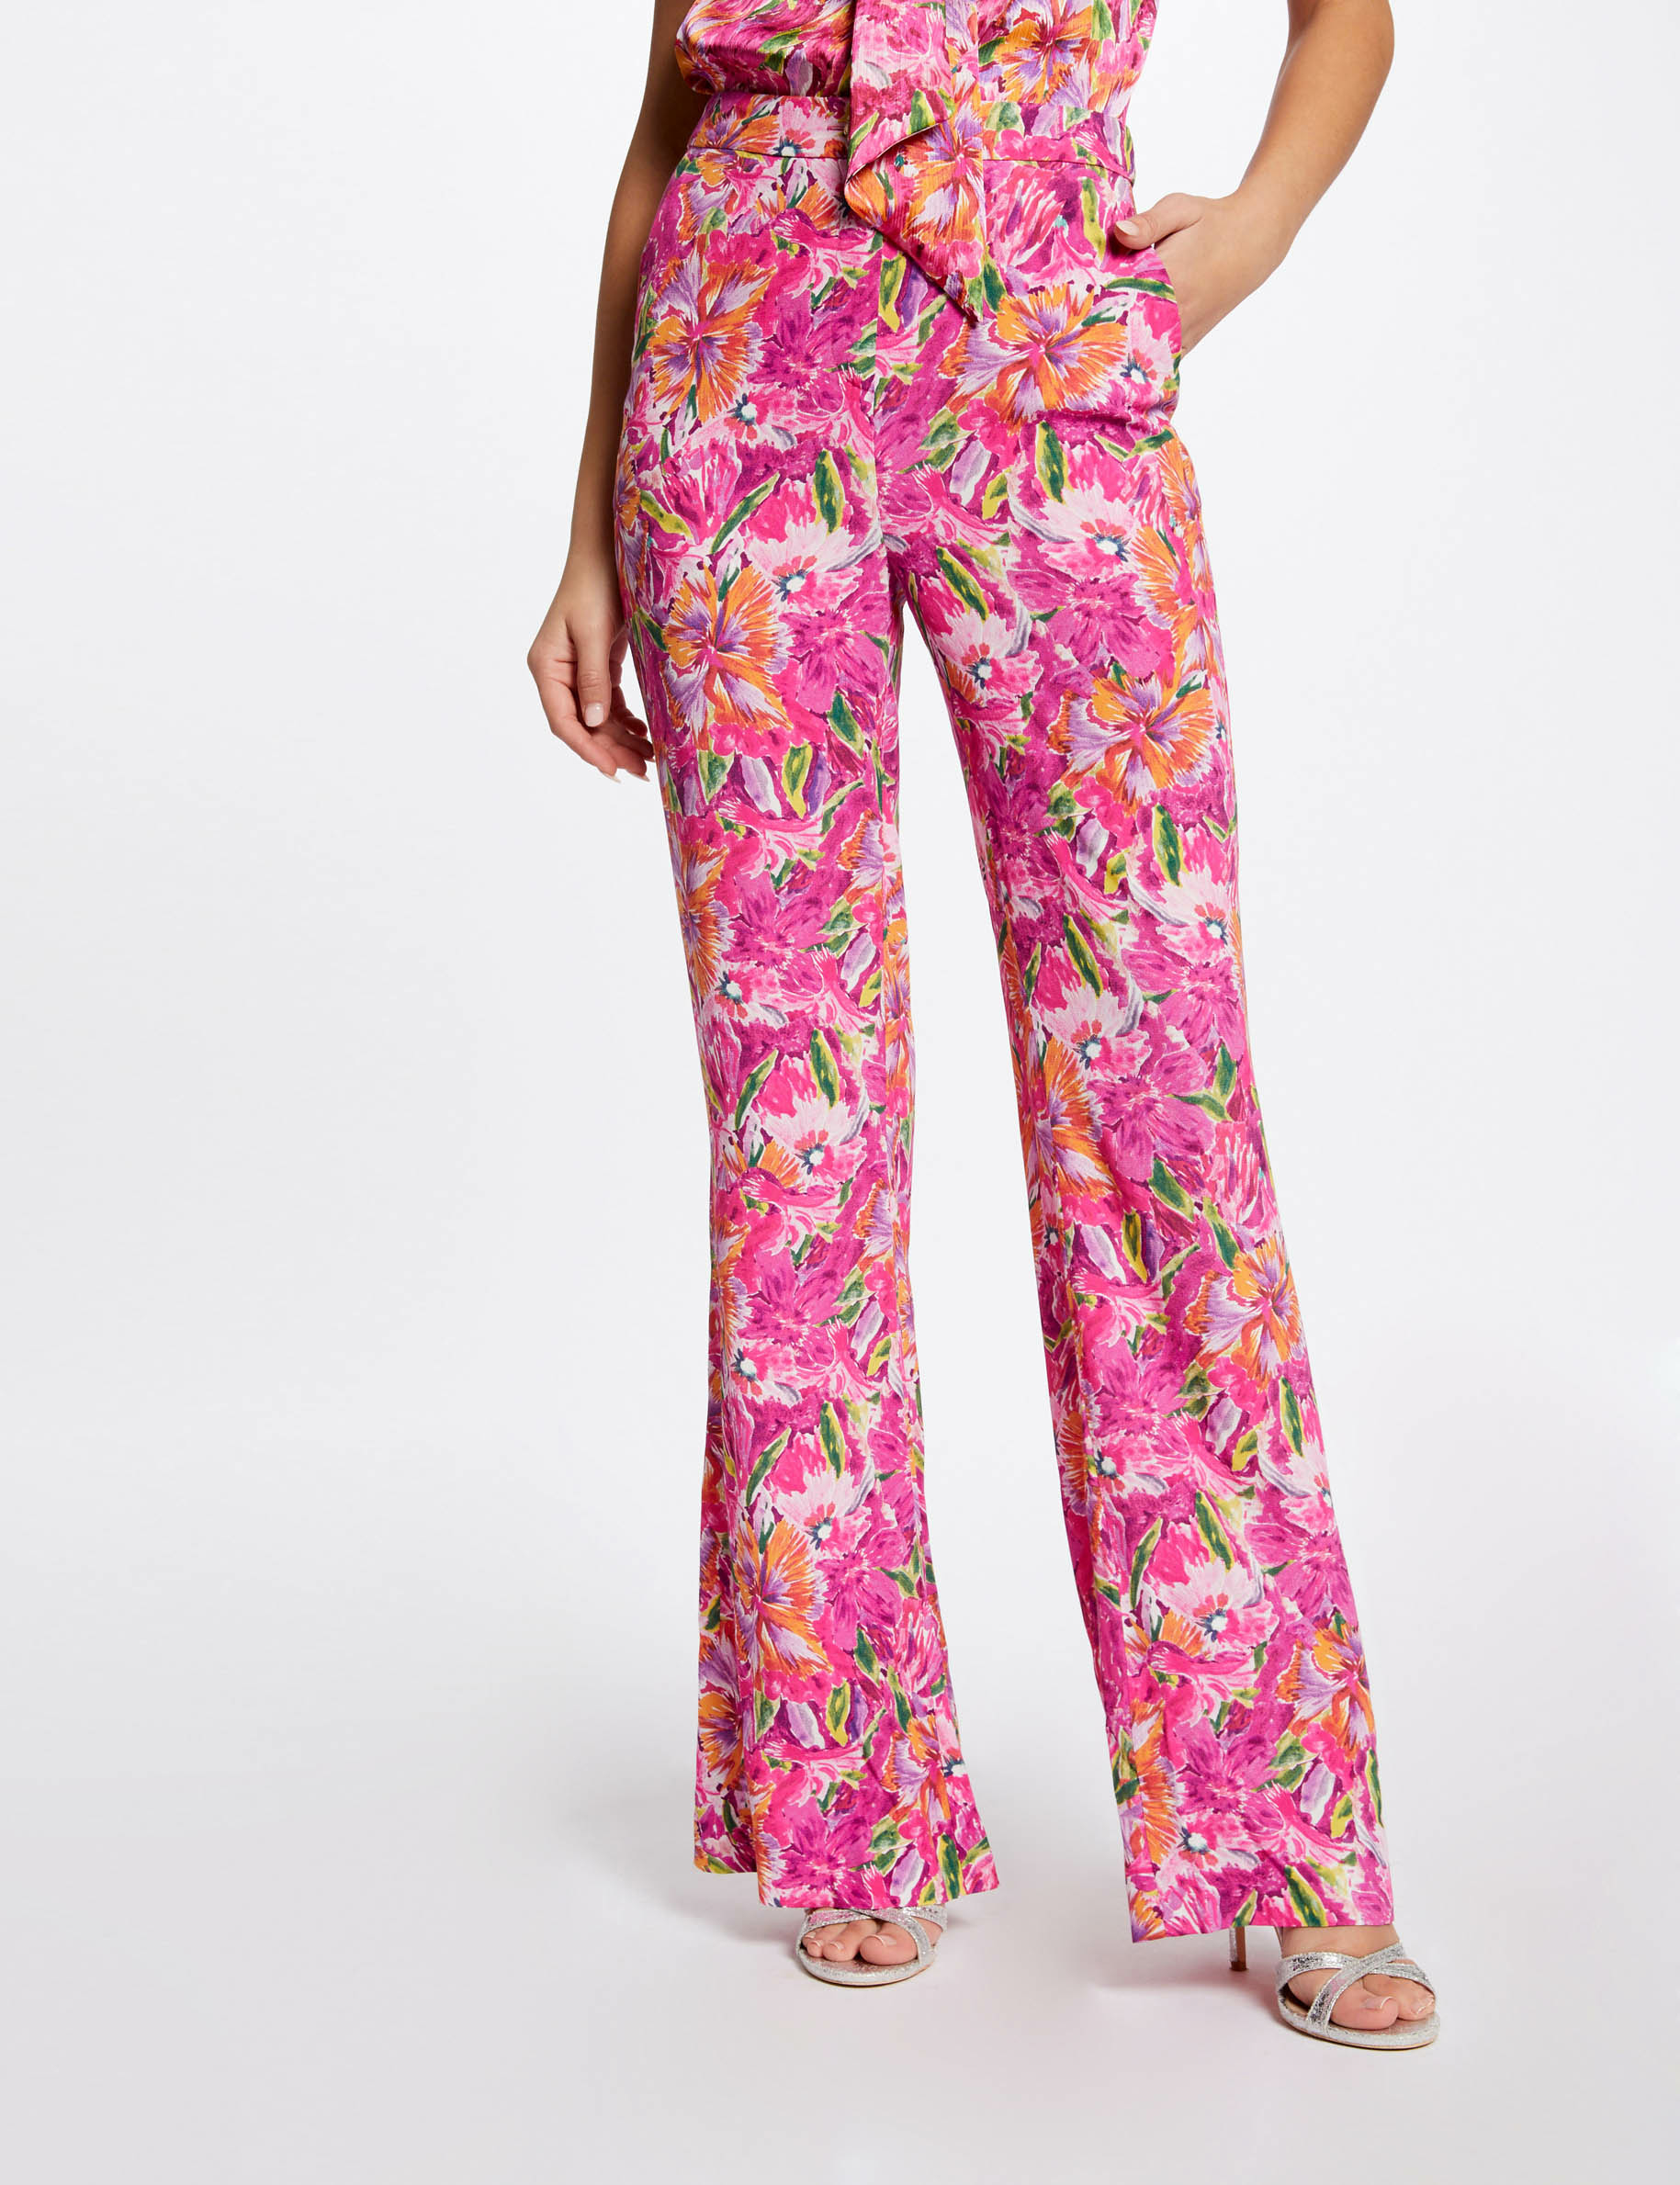 Vero Moda Women Brown Floral Printed Loose Fit HighRise Culottes Trousers  Price in India Full Specifications  Offers  DTashioncom